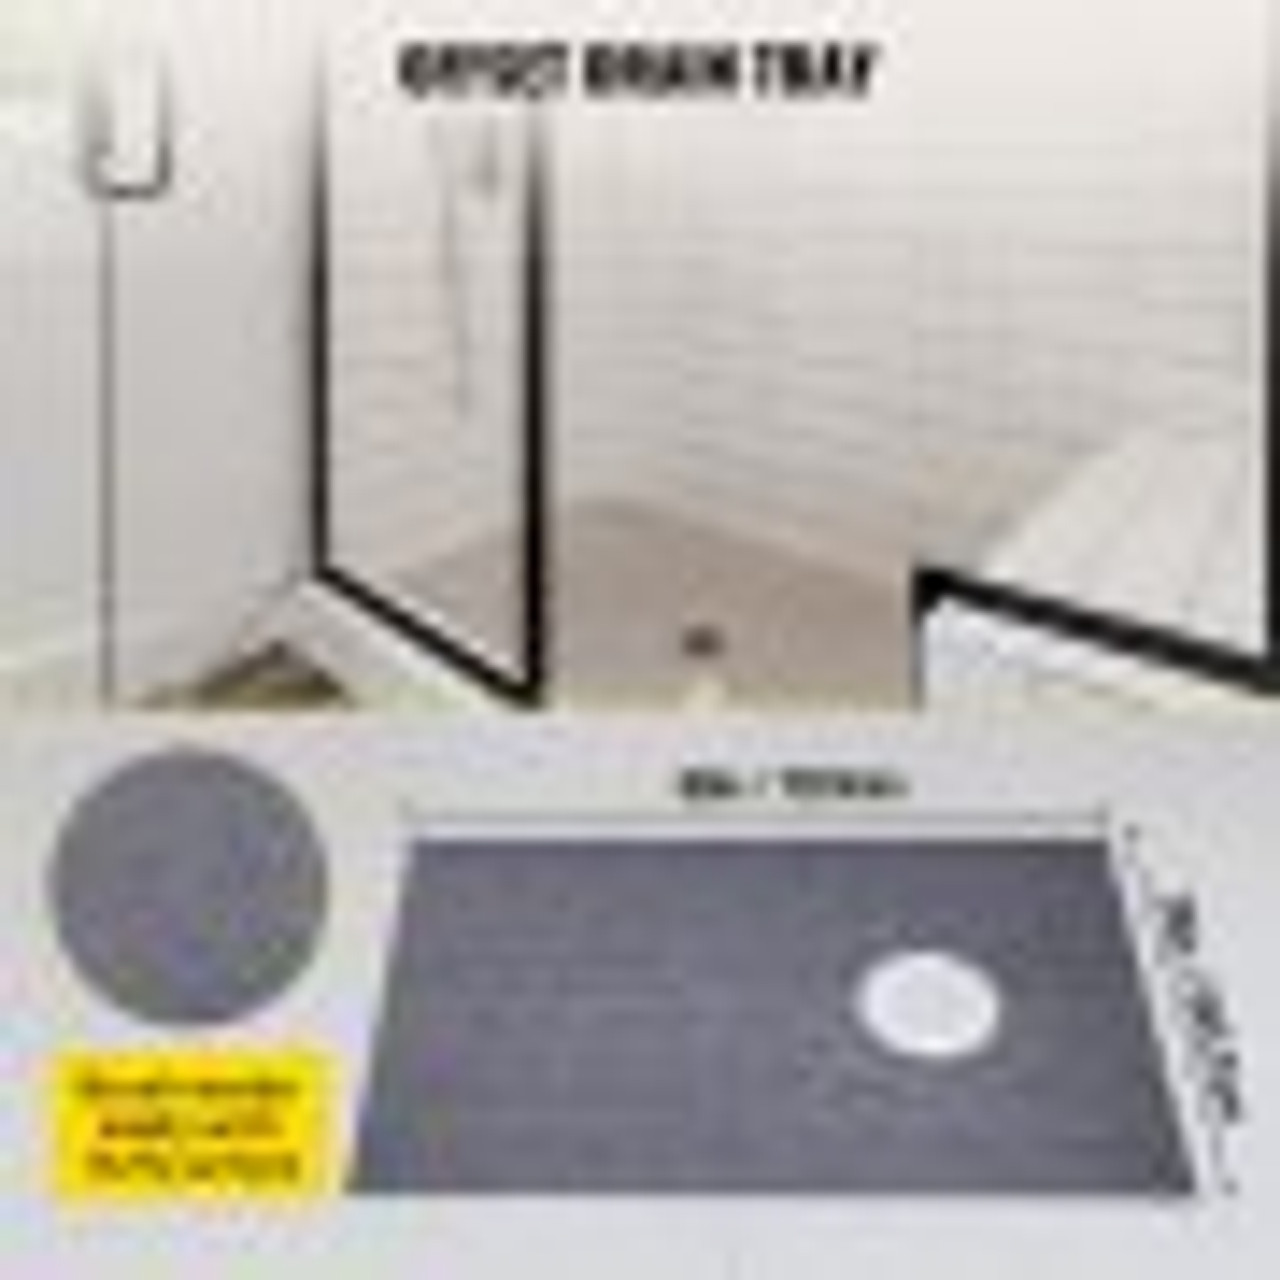 Shower Curb Kit 38" x 60" Watertight Shower Curb Overlay with 4" PVC Offset Bonding Flange, 4" Stainless Steel Grate, 2 Cuttable Shower Curb and Trowel, Shower Pan Slope Sticks Fit for Bathroom